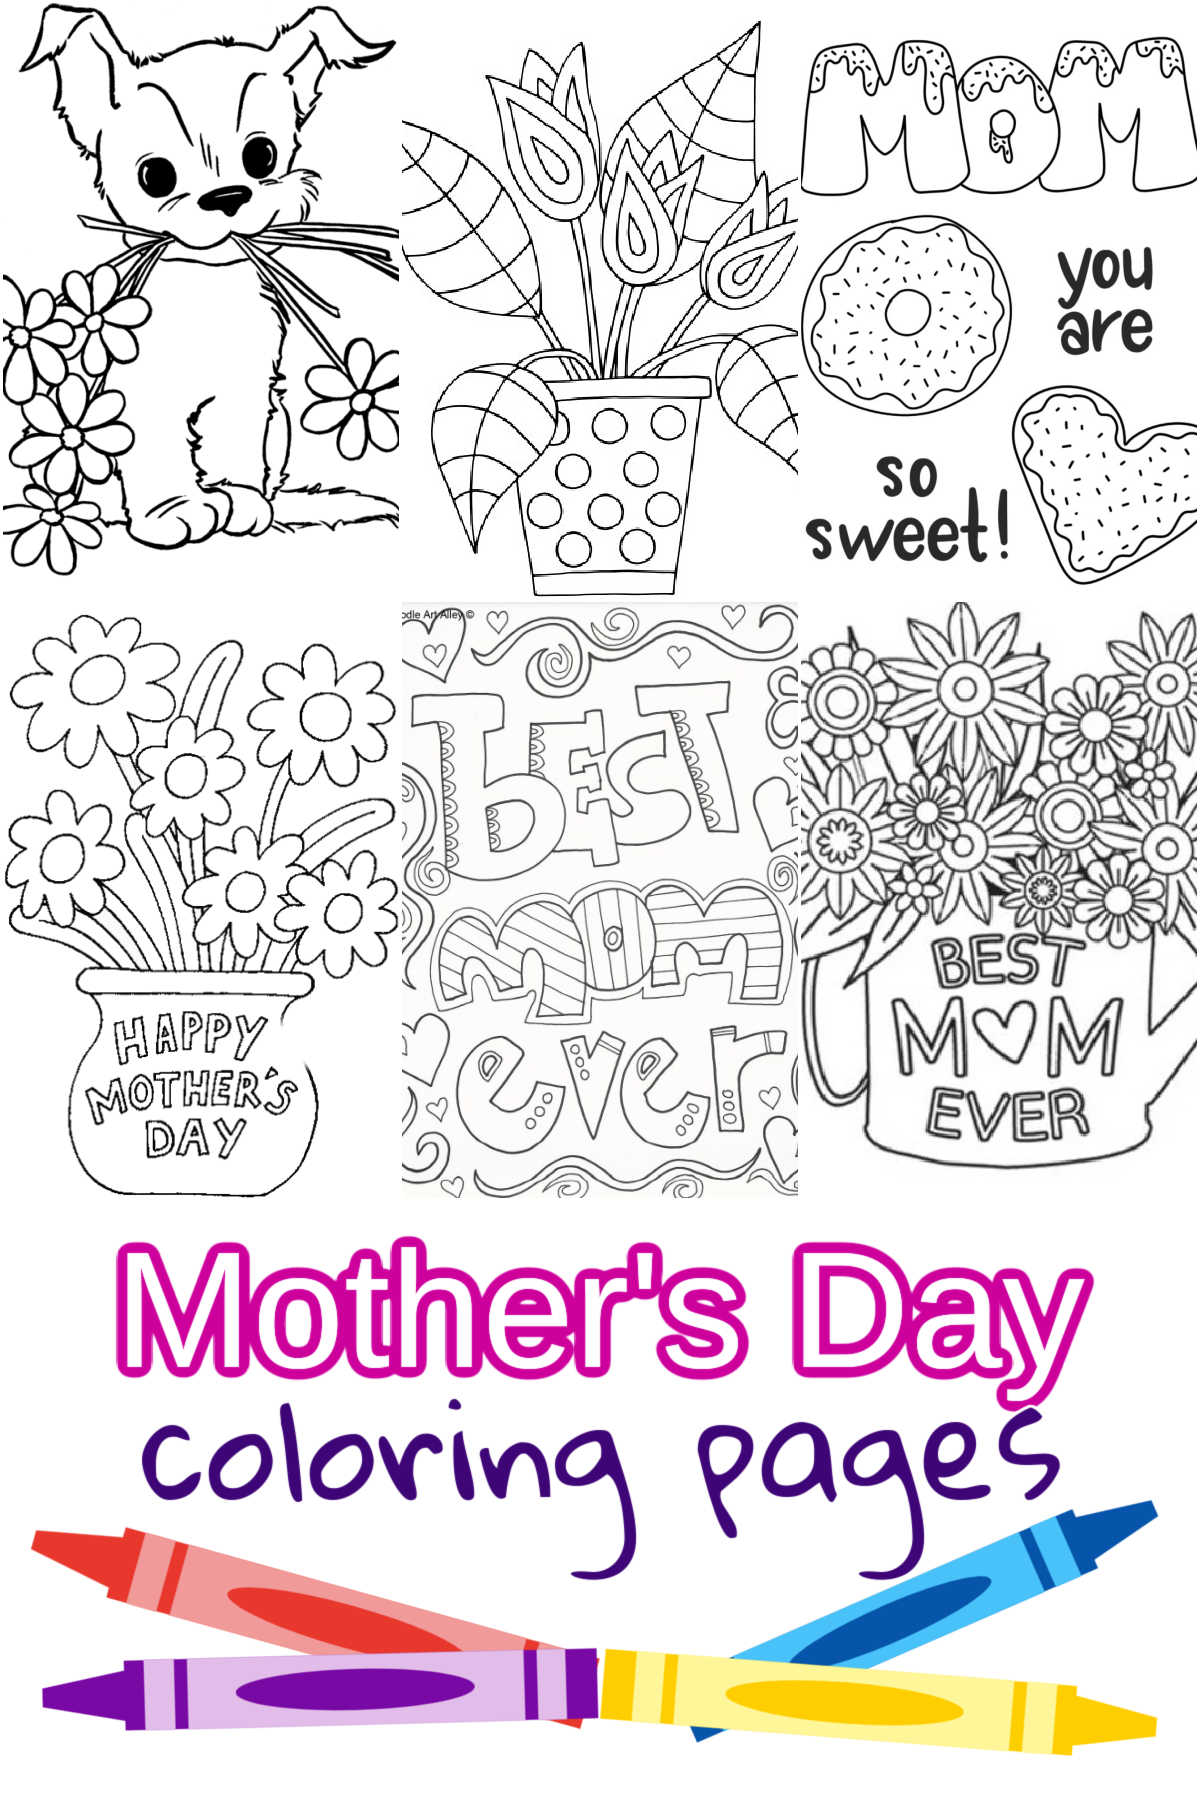 Collage of Mother's Day Coloring Pages